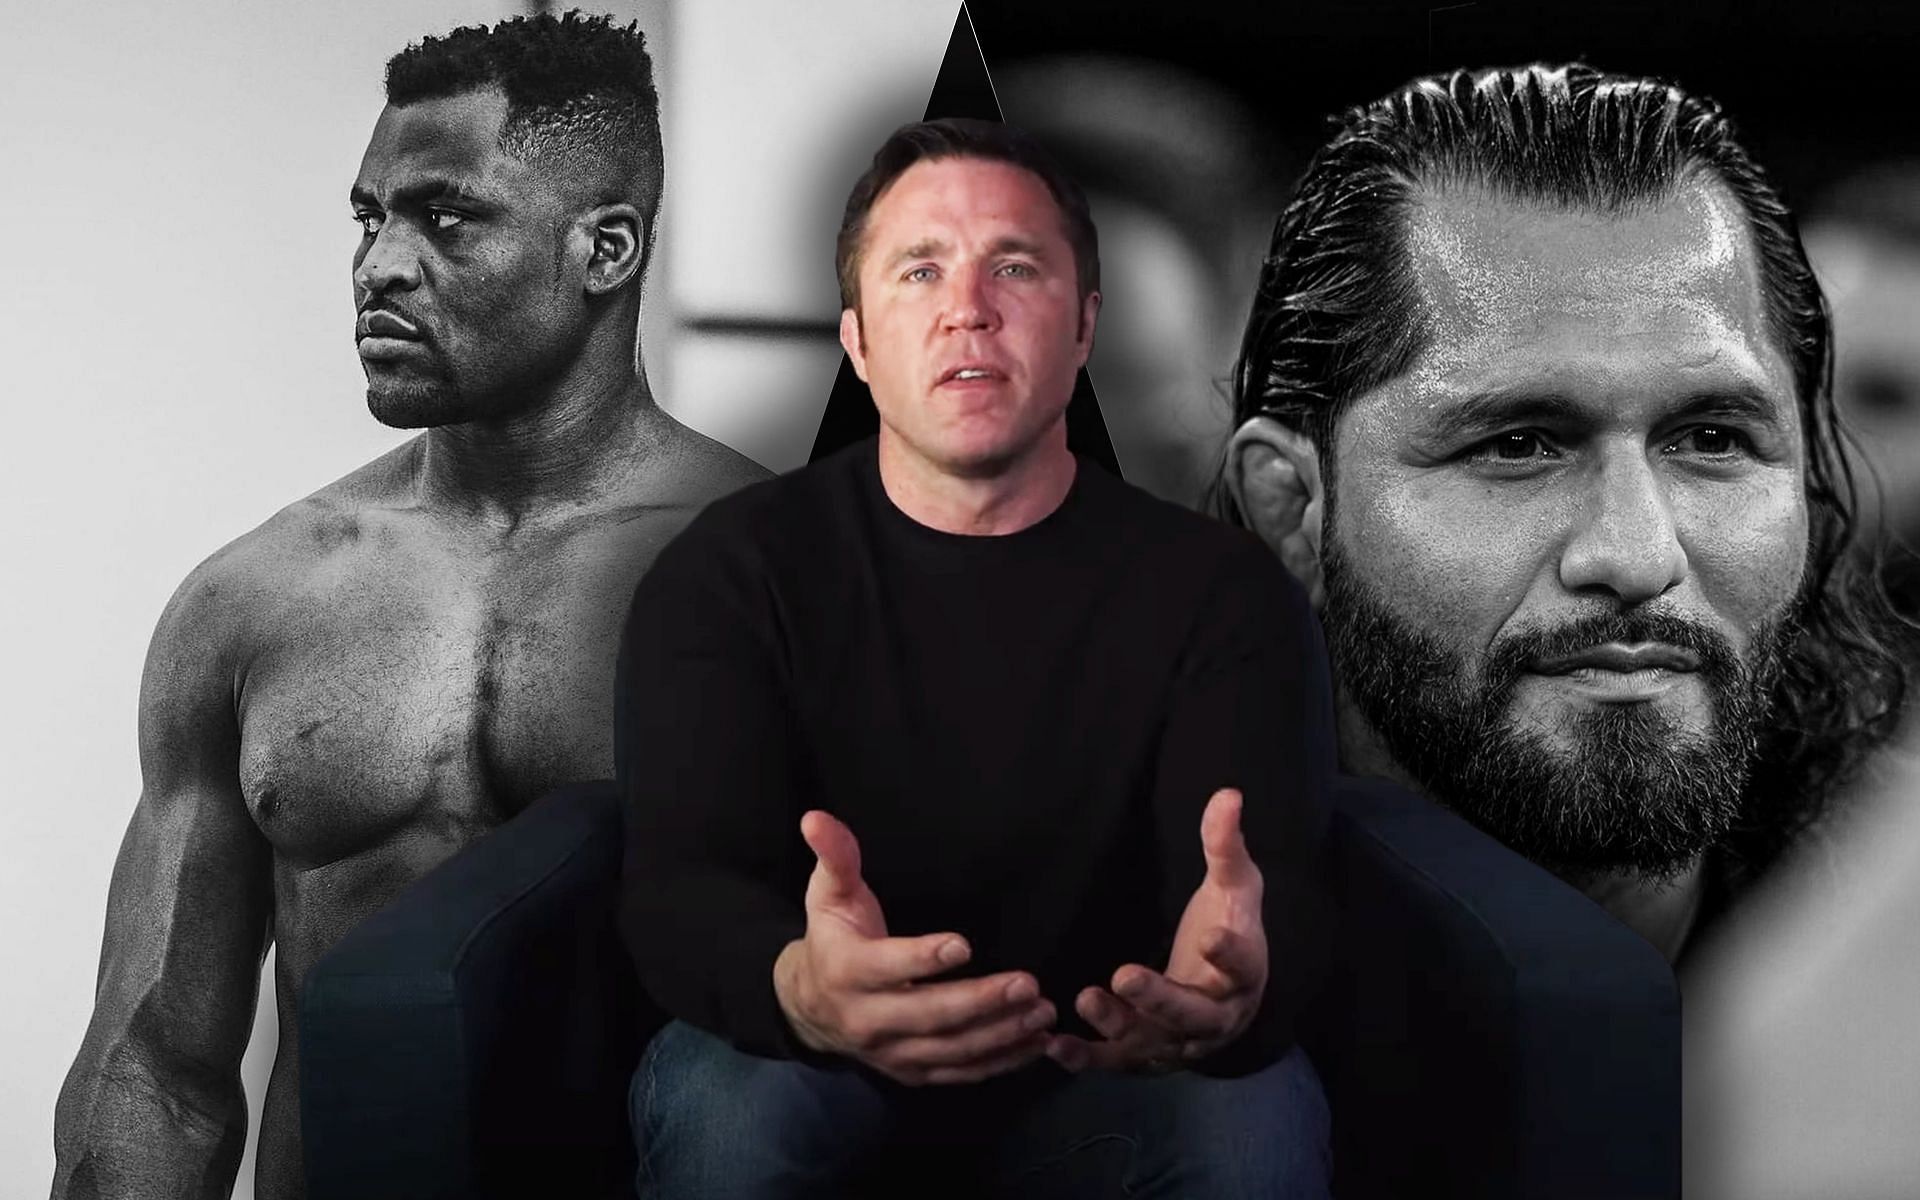 Chael Sonnen opened up on how Jorge Masvidal promotes his fights when compared to Francis Ngannou (Image credits - Chael Sonnen - YouTube | Francis Ngannou- Instagram | Jorge Masvidal - Instagram)